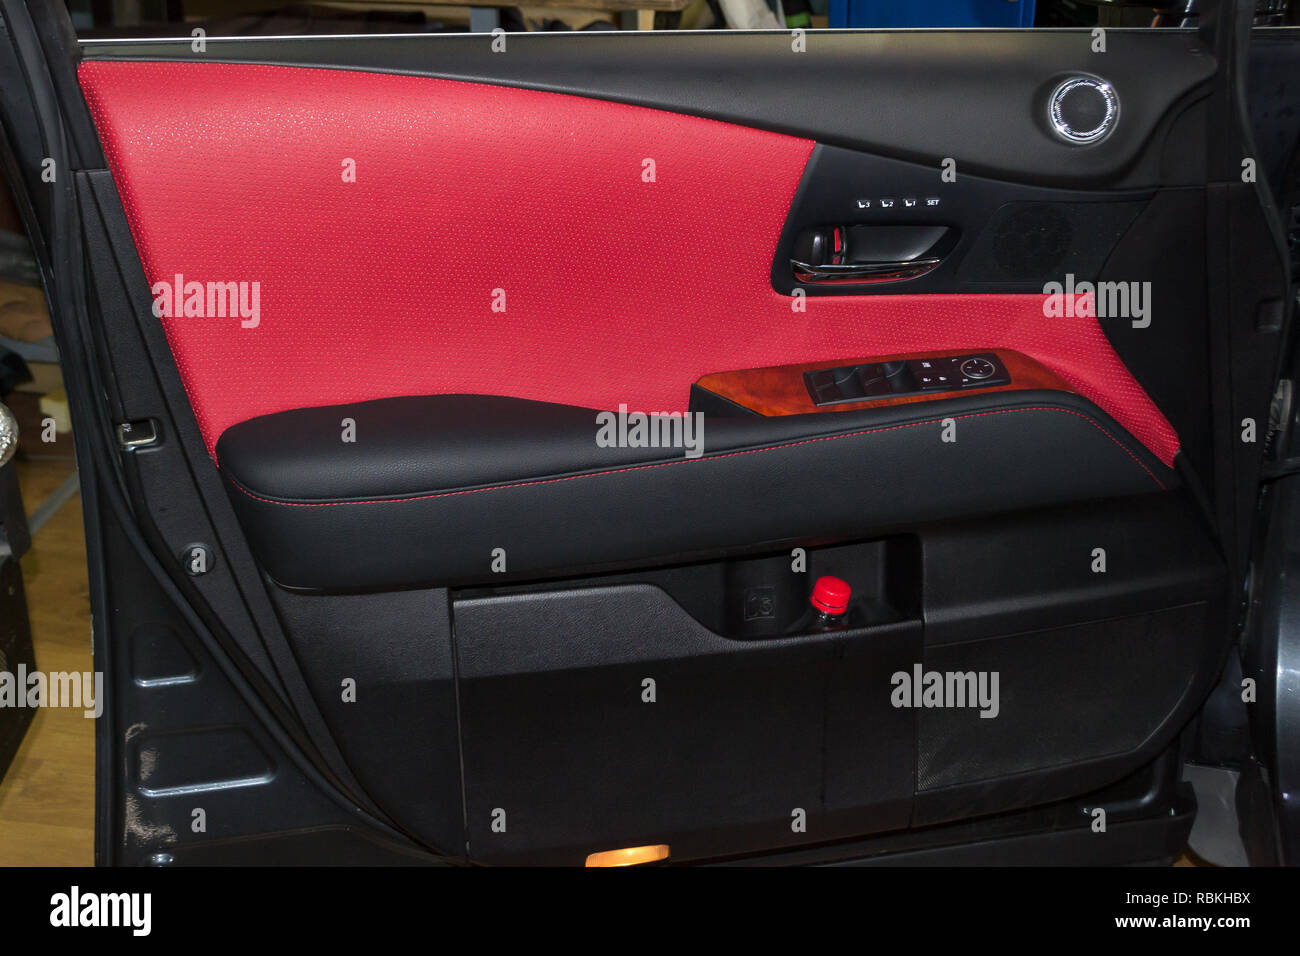 https://c8.alamy.com/comp/RBKHBX/interior-of-the-suv-car-with-a-rebuilt-leather-in-red-black-color-in-exchange-for-the-old-worn-out-interior-trim-in-the-workshop-for-repairing-the-sea-RBKHBX.jpg